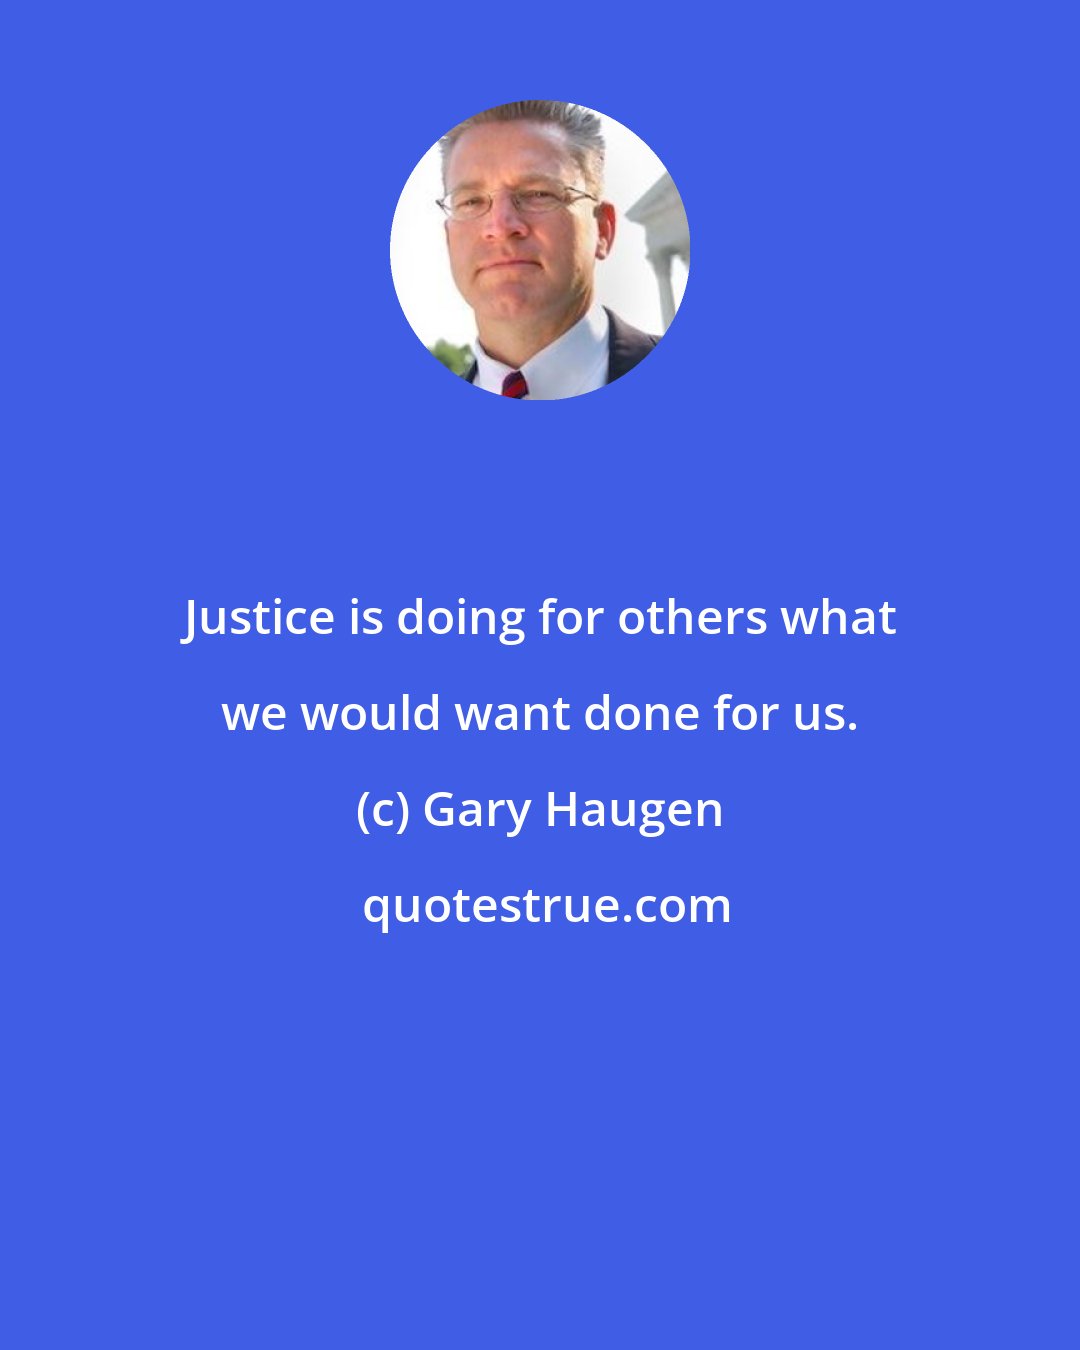 Gary Haugen: Justice is doing for others what we would want done for us.